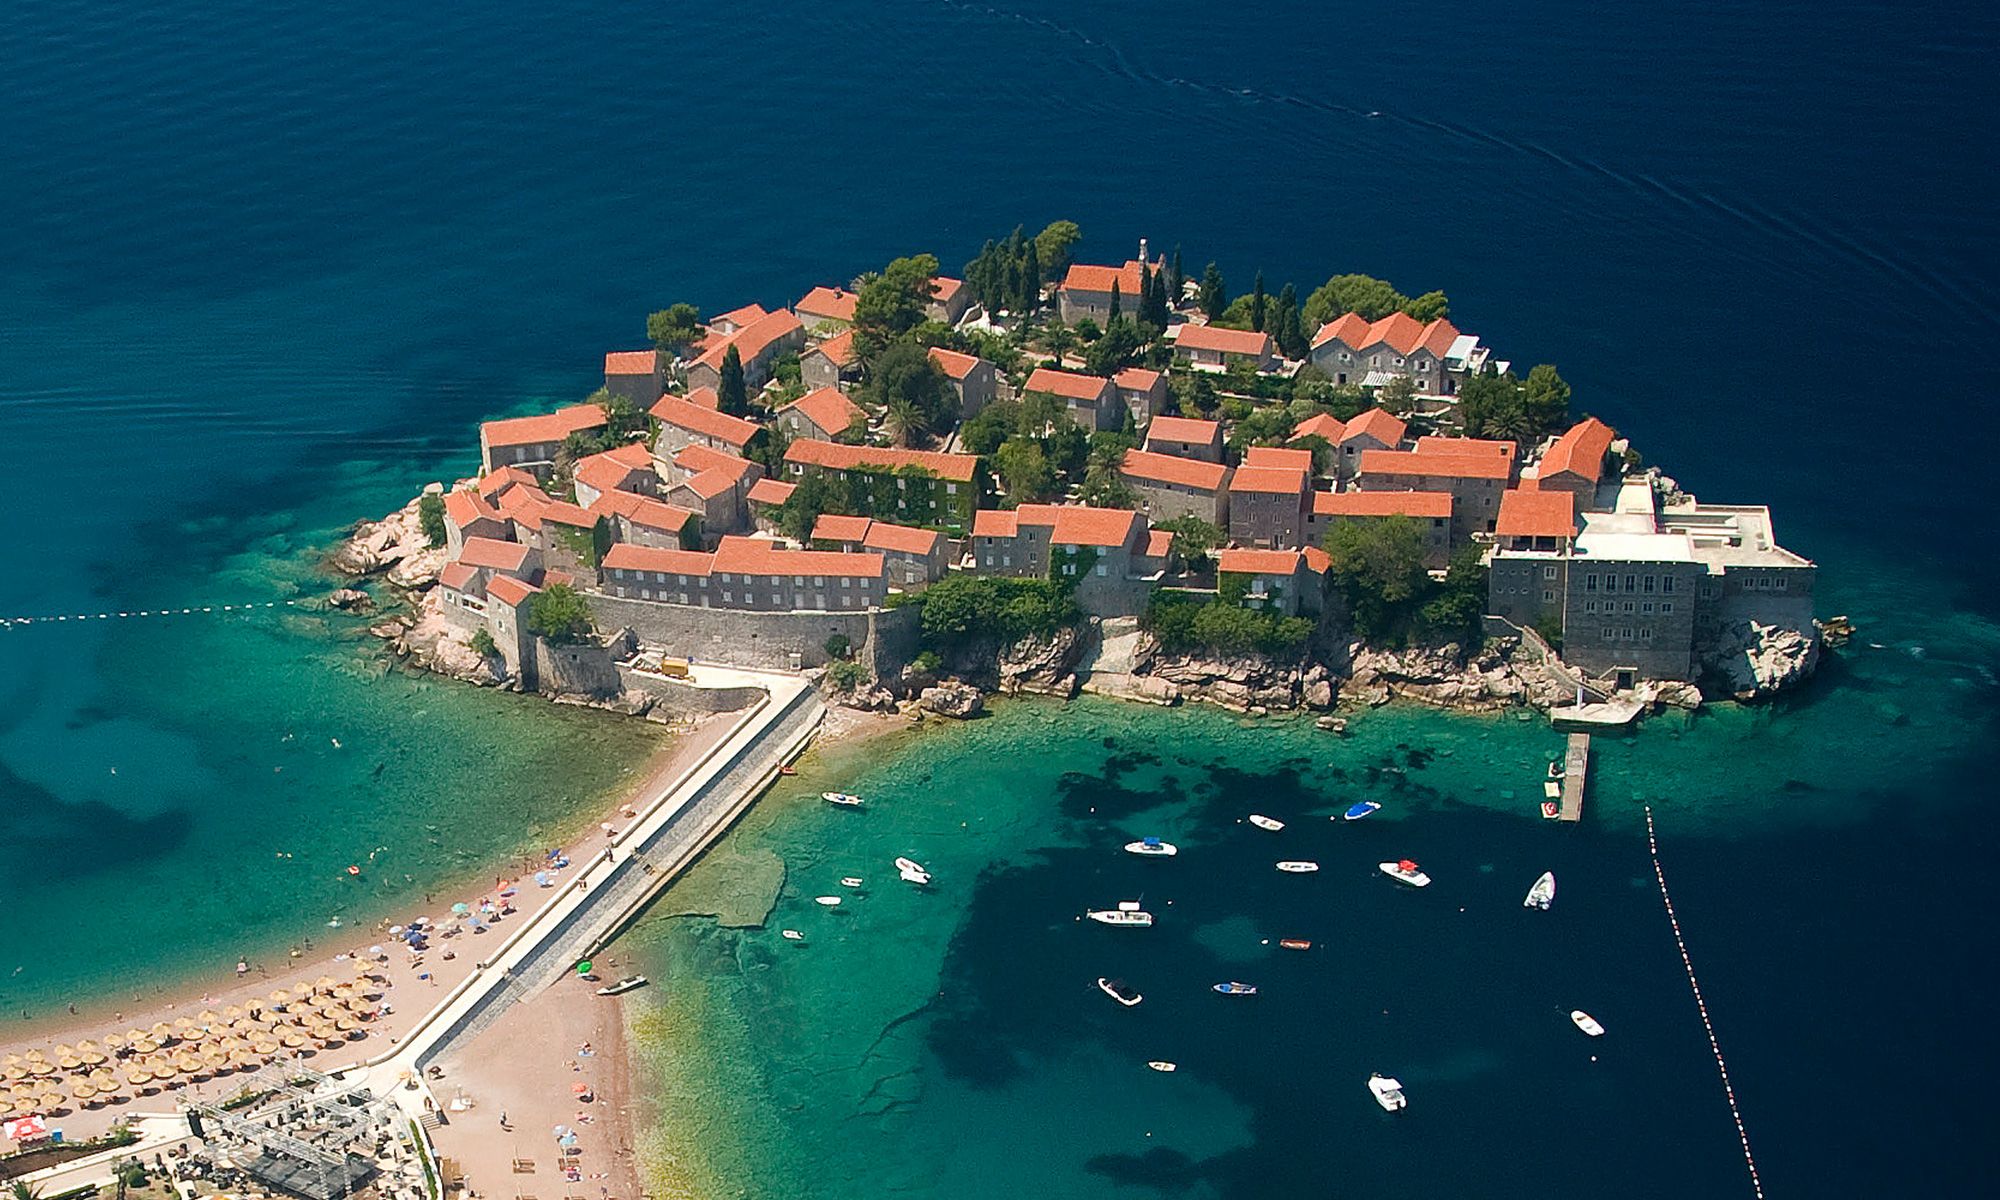 Beach on Sveti Stefan Included in 30 of The Most Stunning Beaches in Europe List